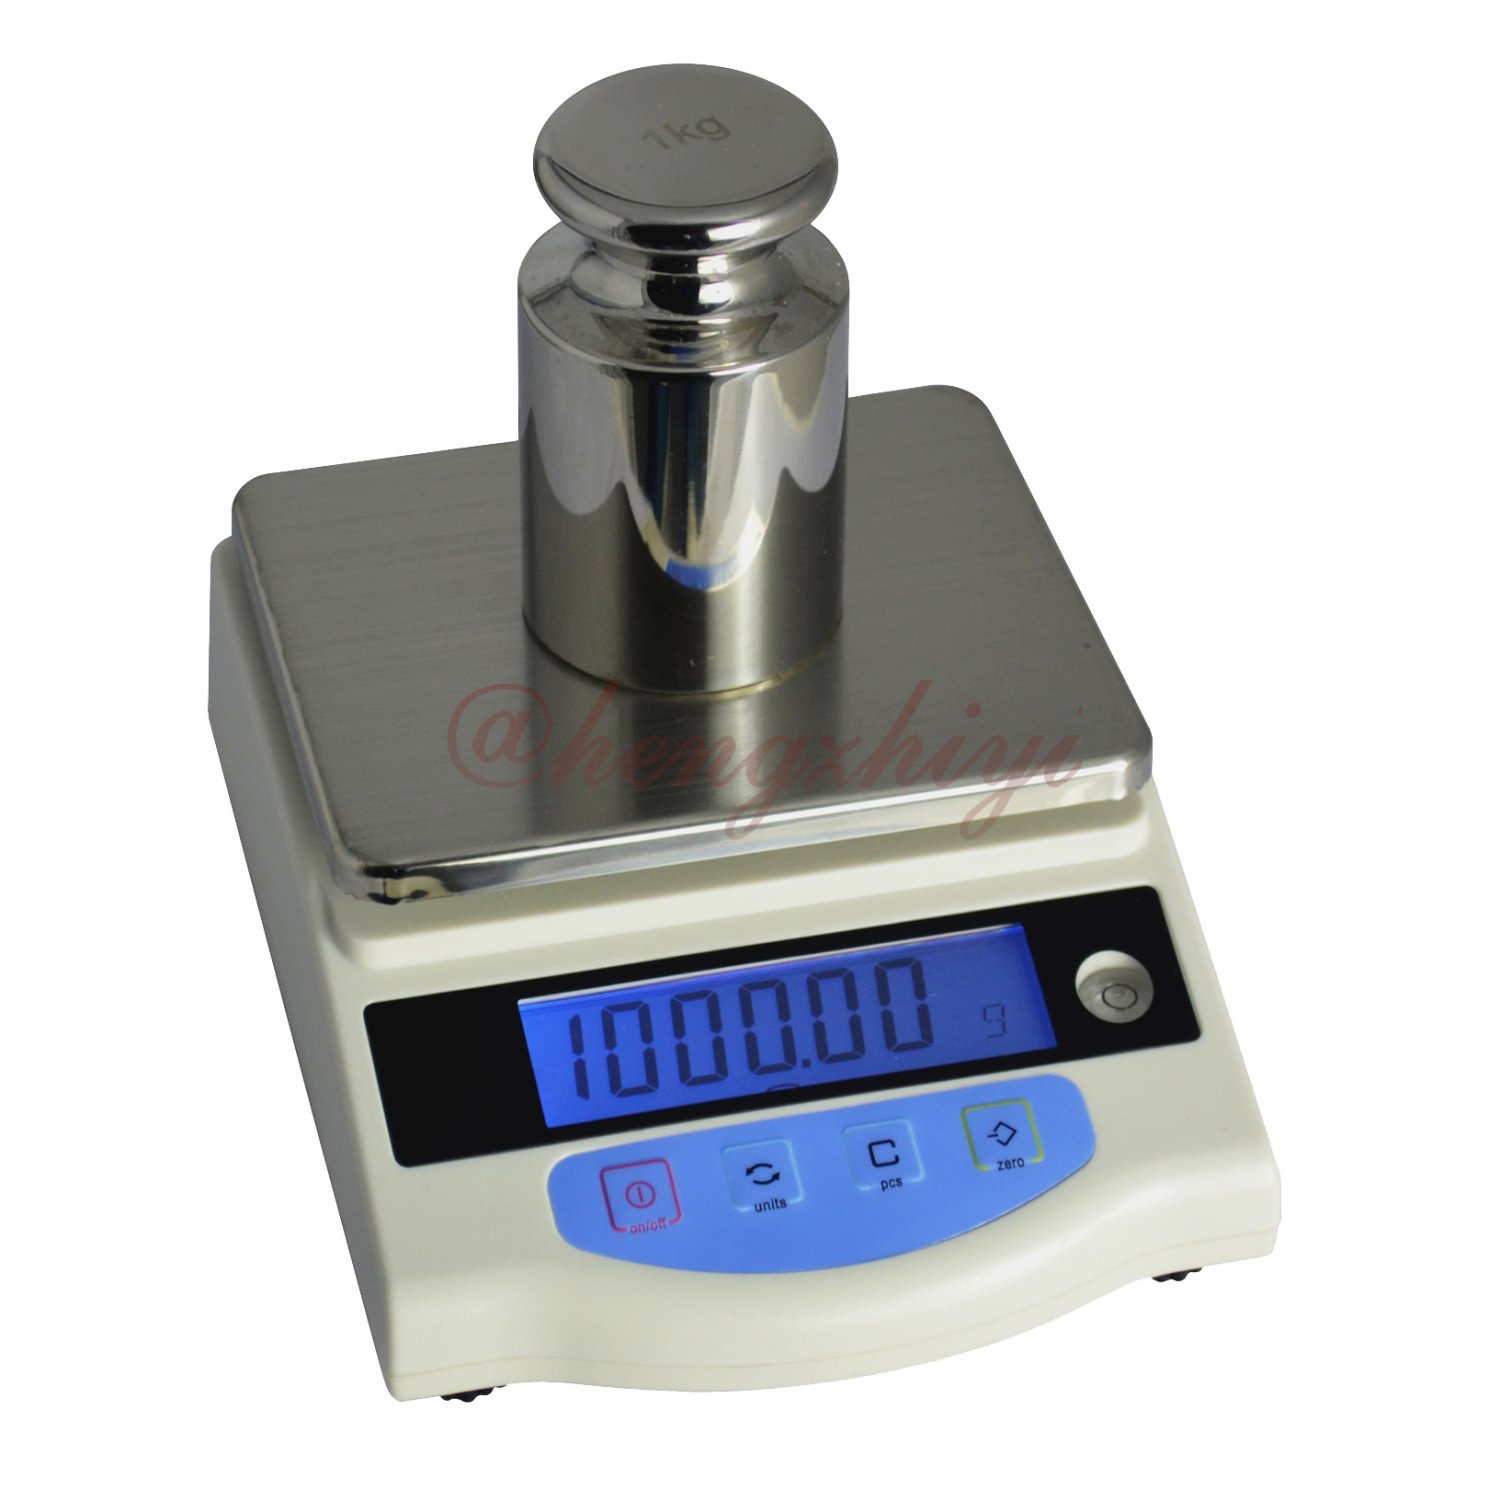 2kg x 0.01g Precision Digital Table Top Scale Balance w Germany HBM Sensor + Counting, Free Shipping